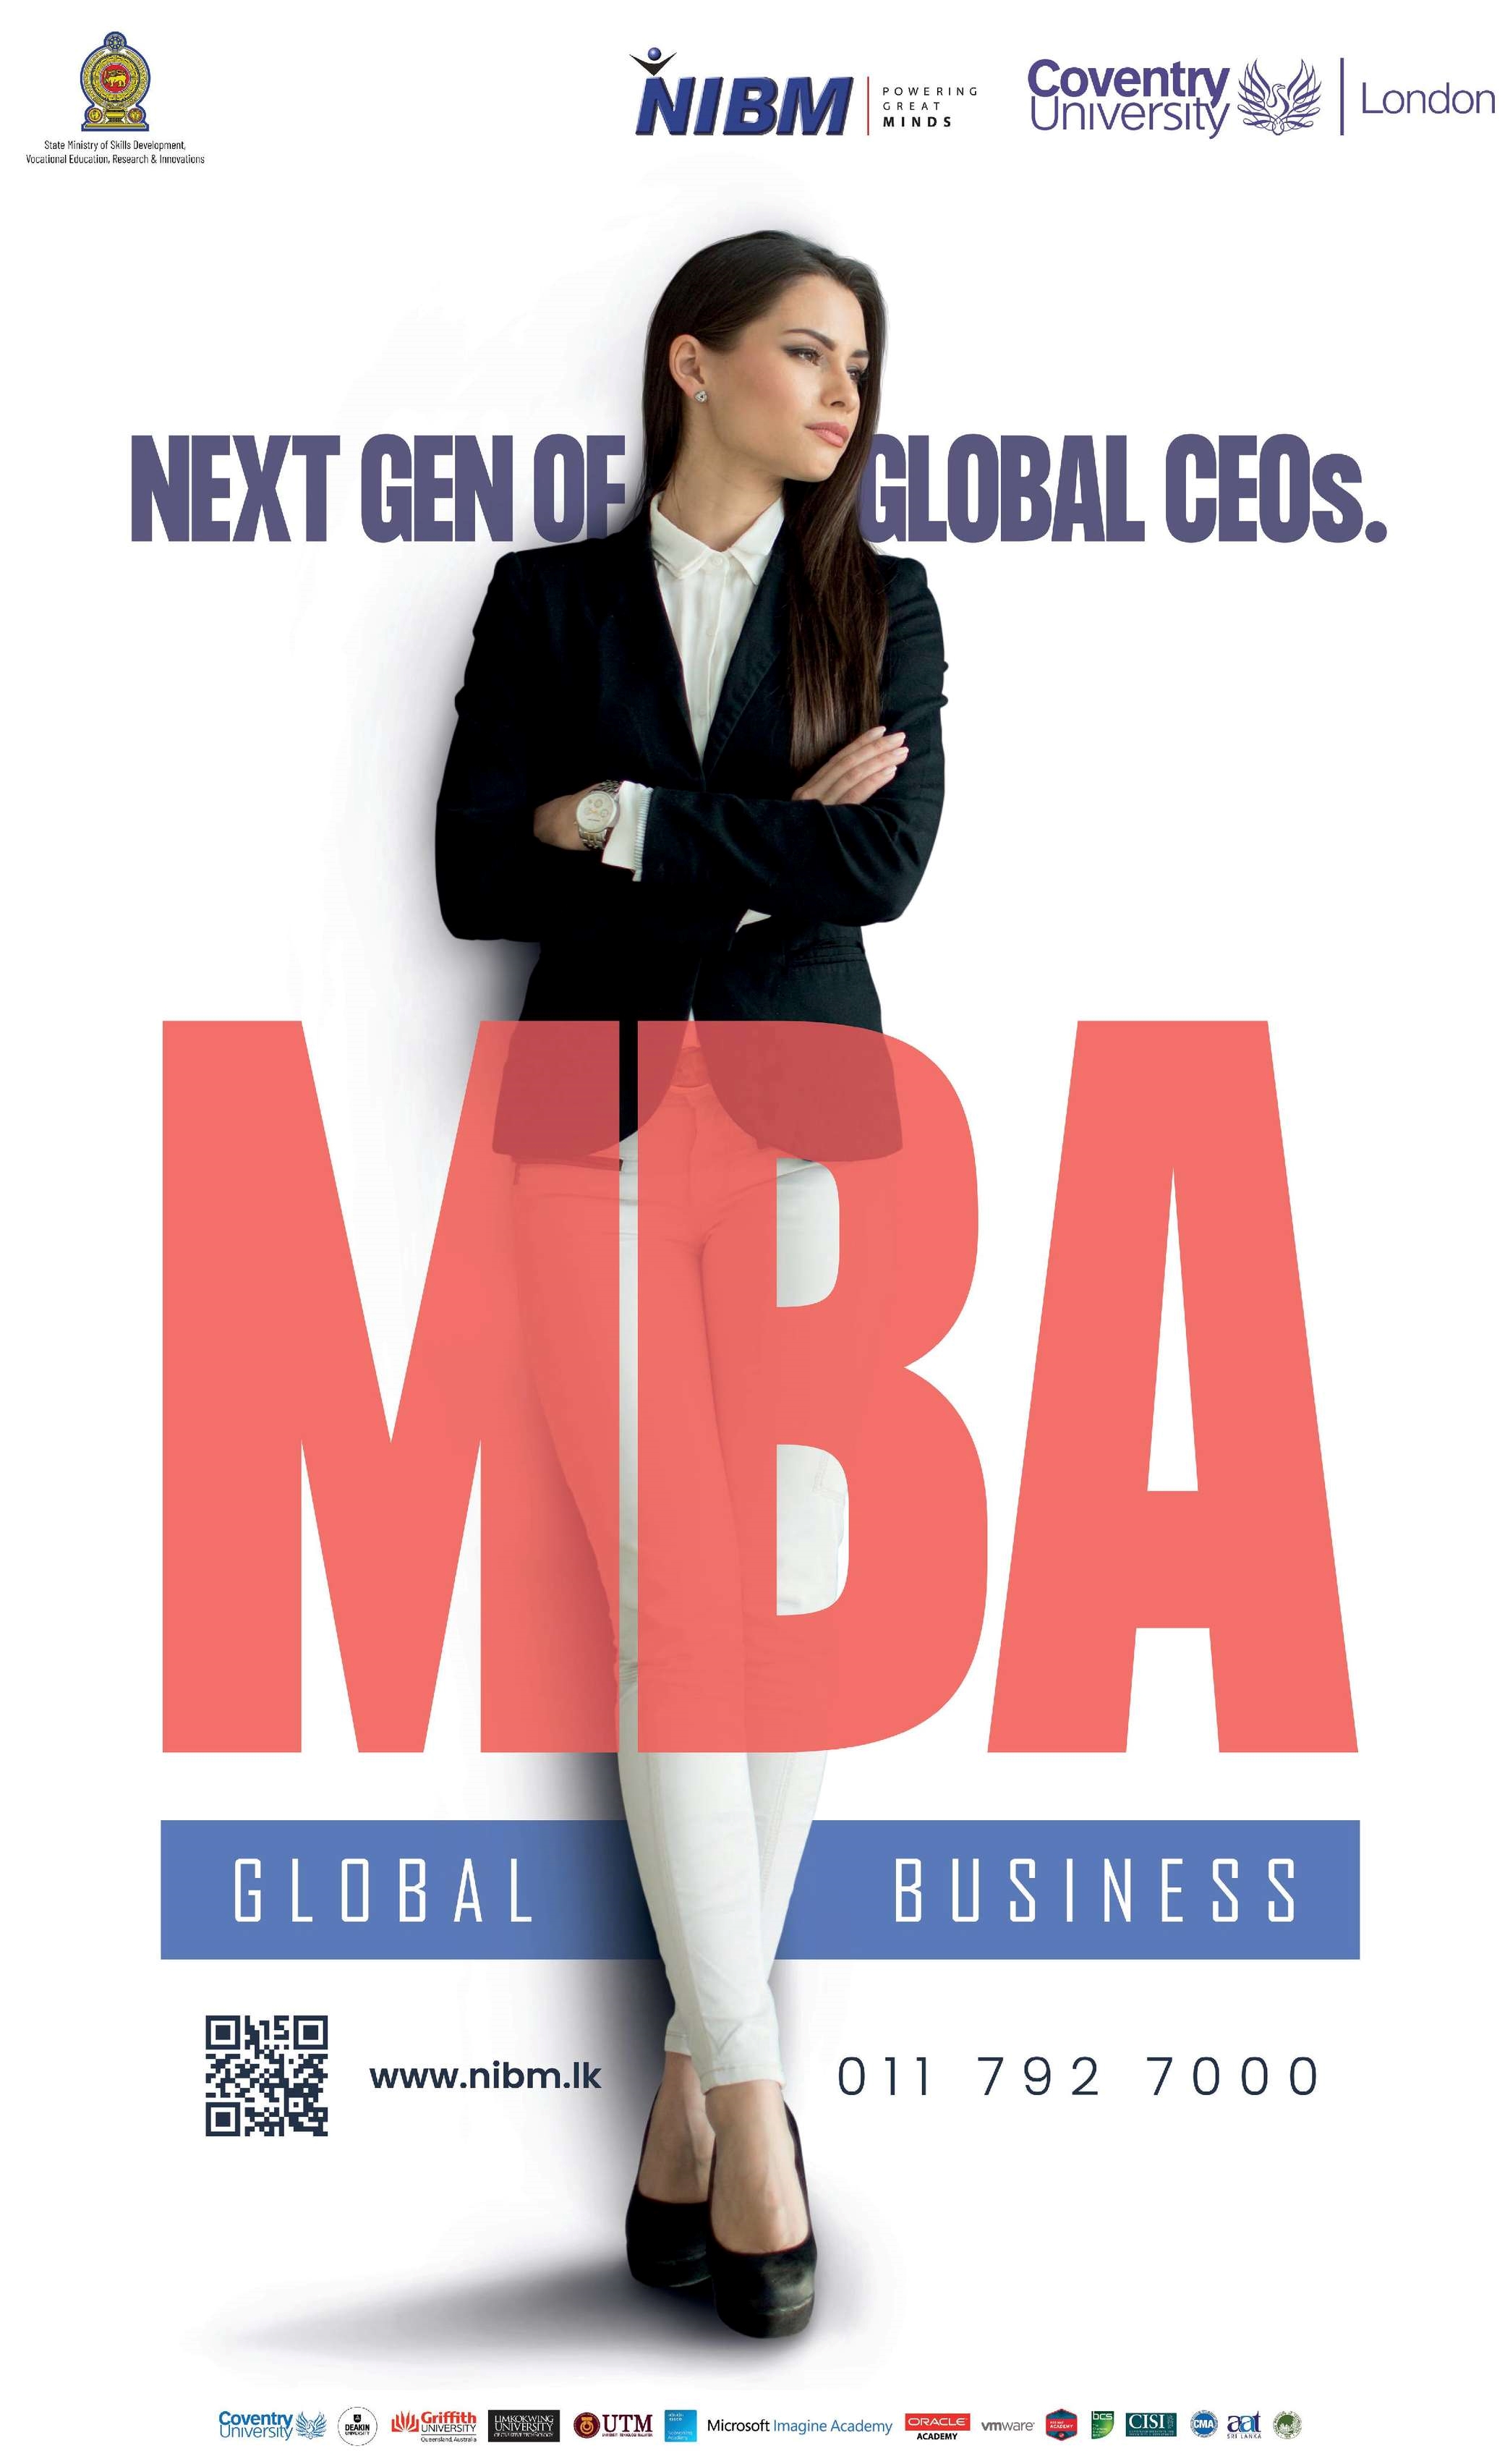 MBA Global Business Degree 2022 - National Institute of Business Management (NIBM) Degree Courses